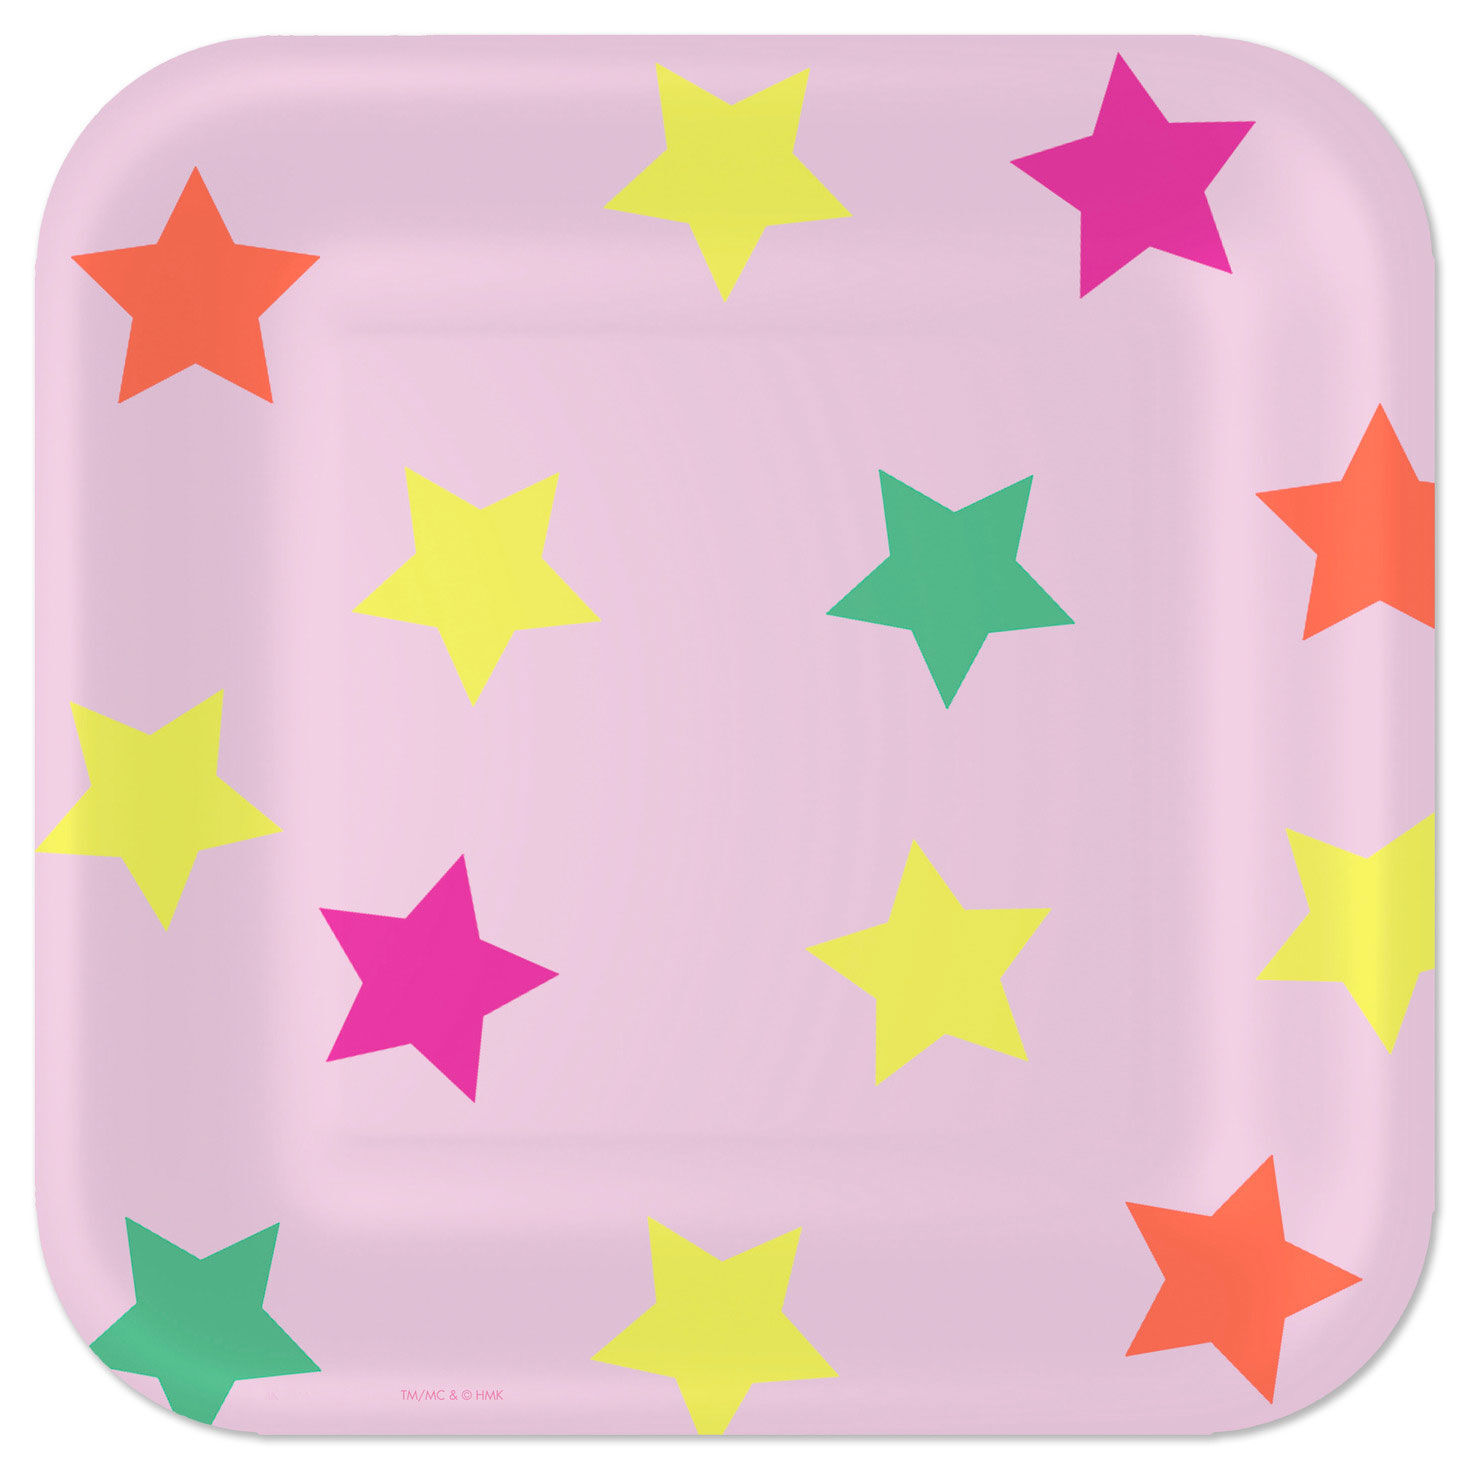 Colorful Stars on Pink Square Dinner Plates, Set of 8 for only USD 4.99 | Hallmark